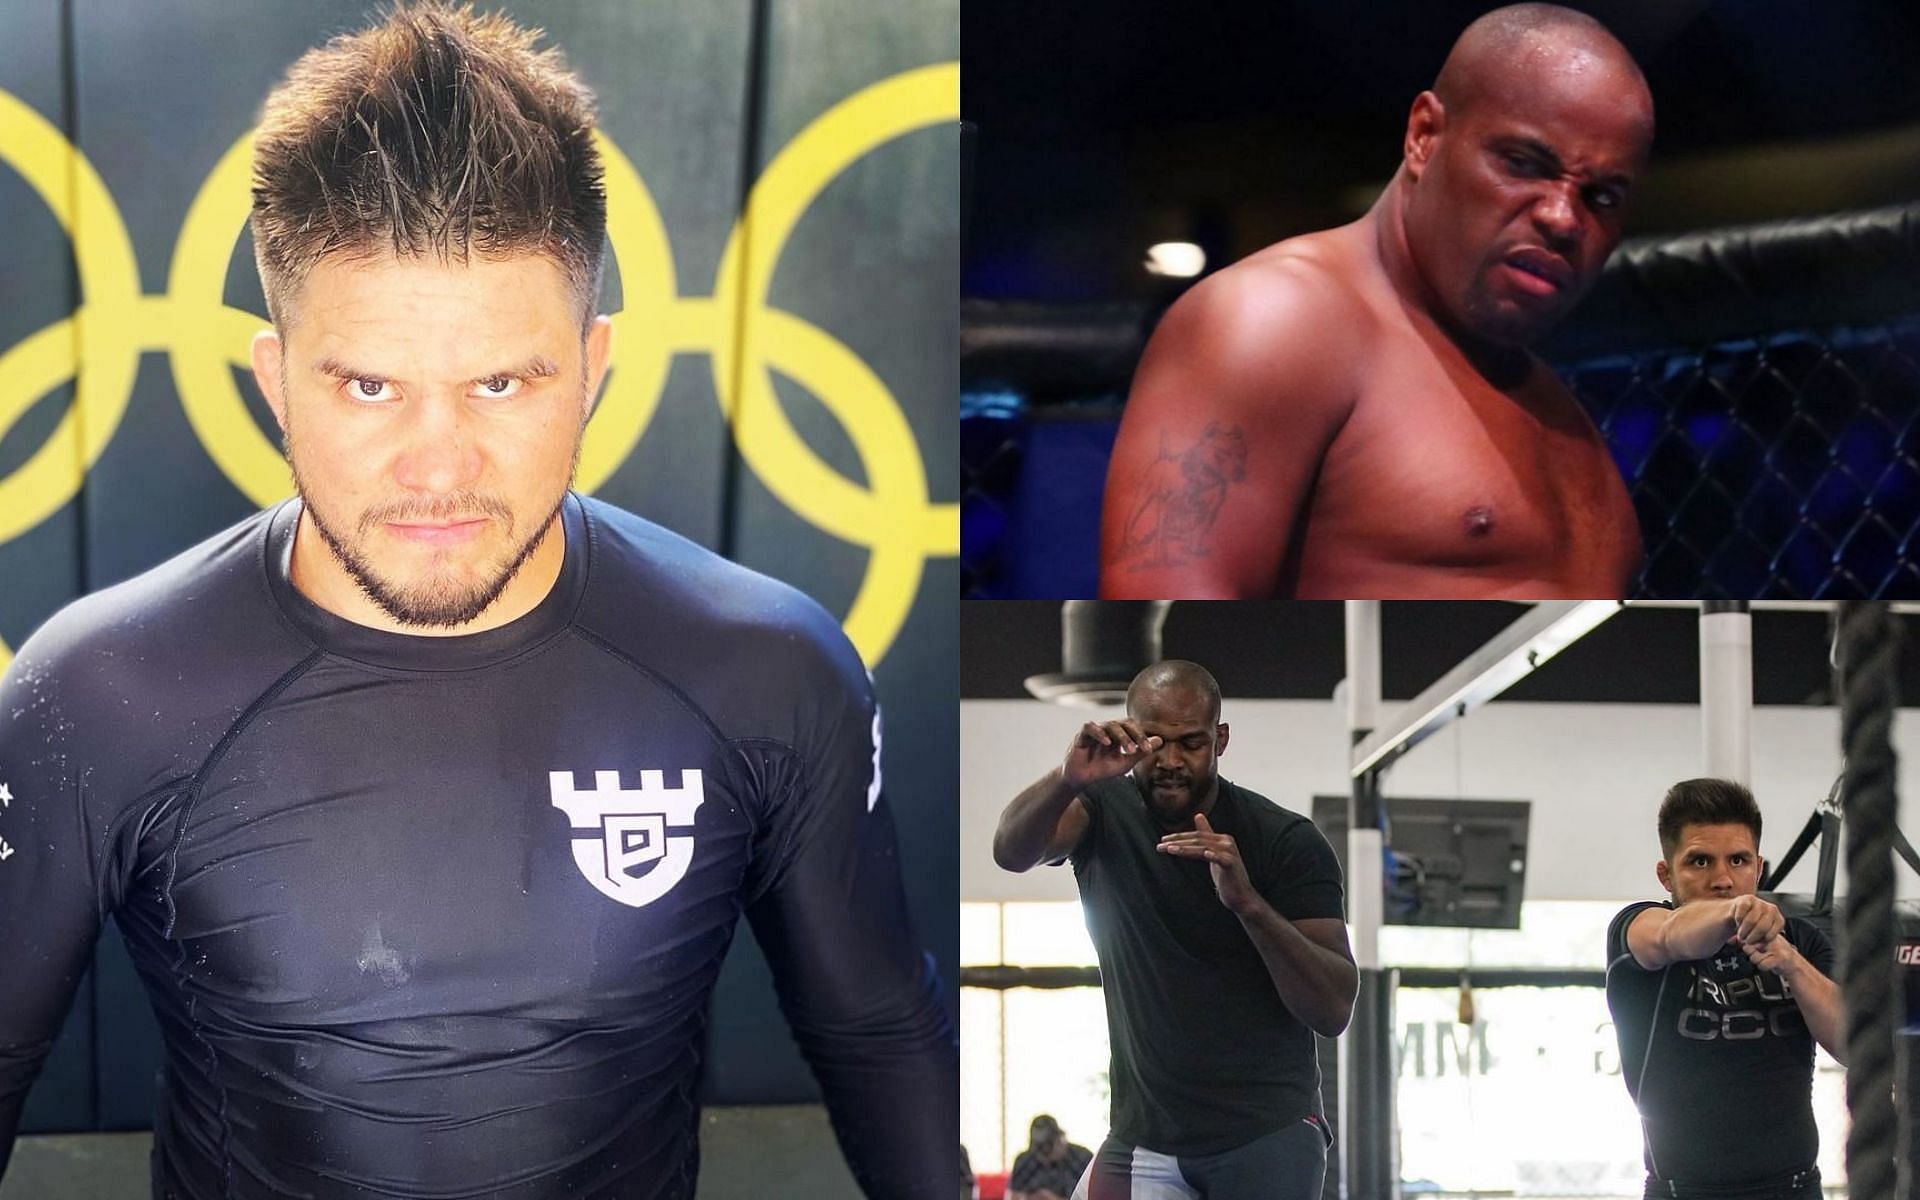 Triple C reacts to DC calling him out for training with Jon Jones [Henry Cejudo image courtesy - @henry_cejudo on Instagram]